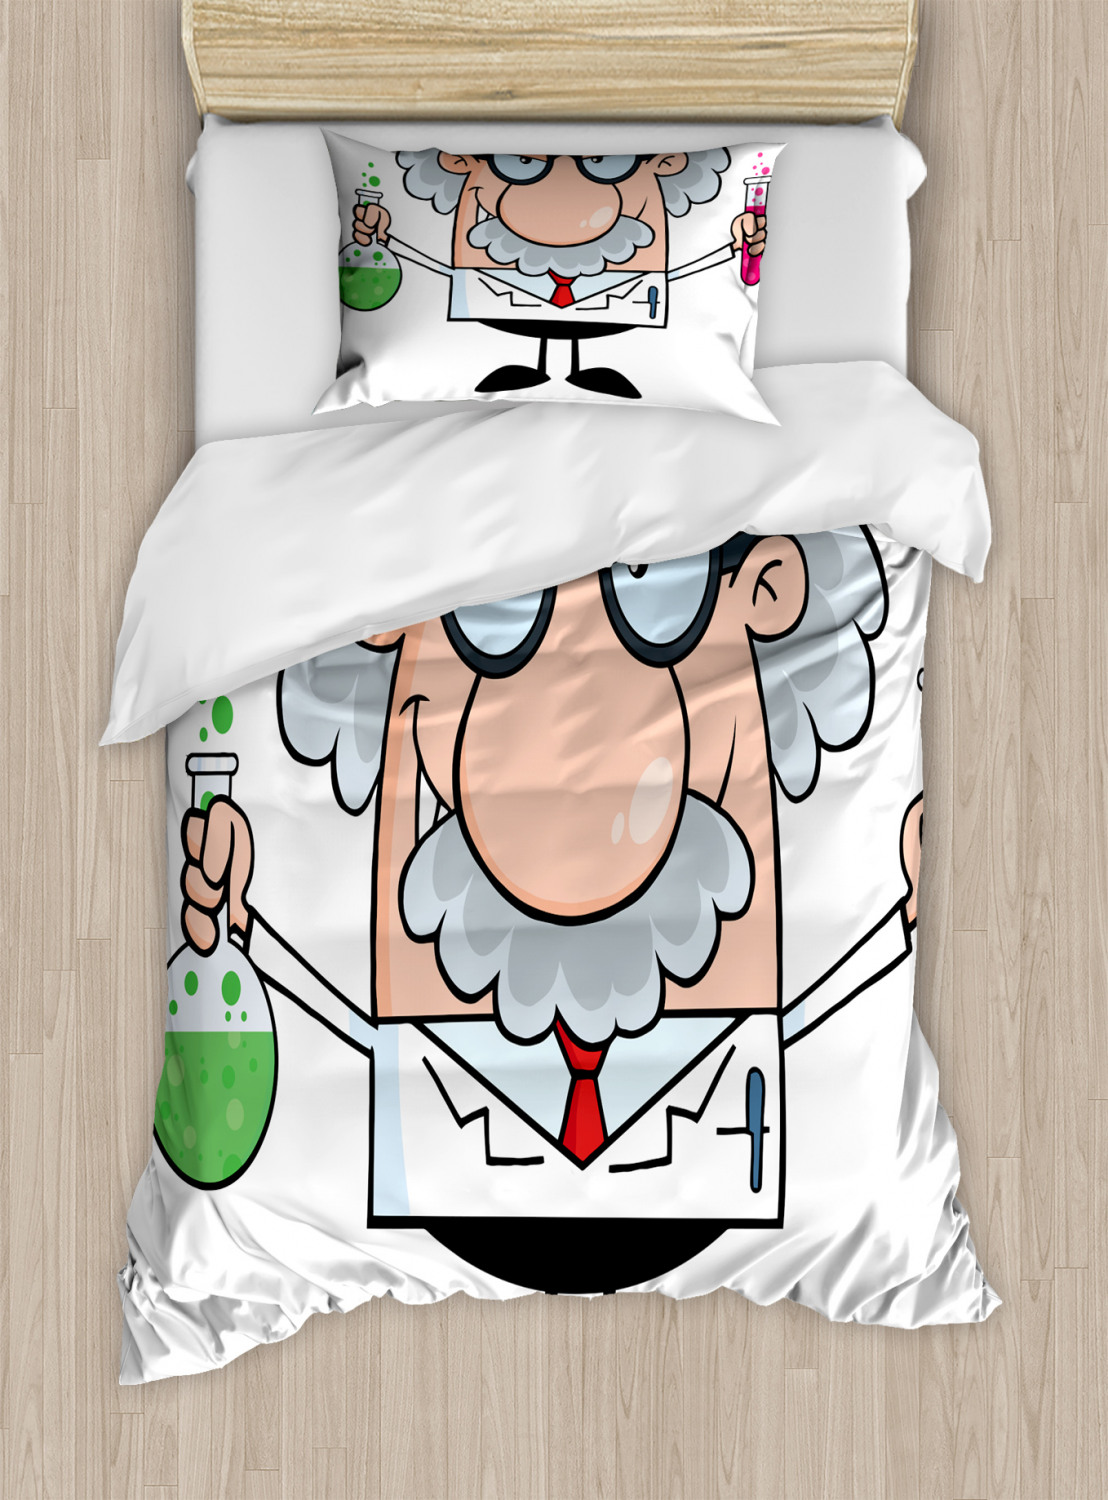 Details about   Cartoon Quilted Bedspread & Pillow Shams Set Nursery Science Theme Print 